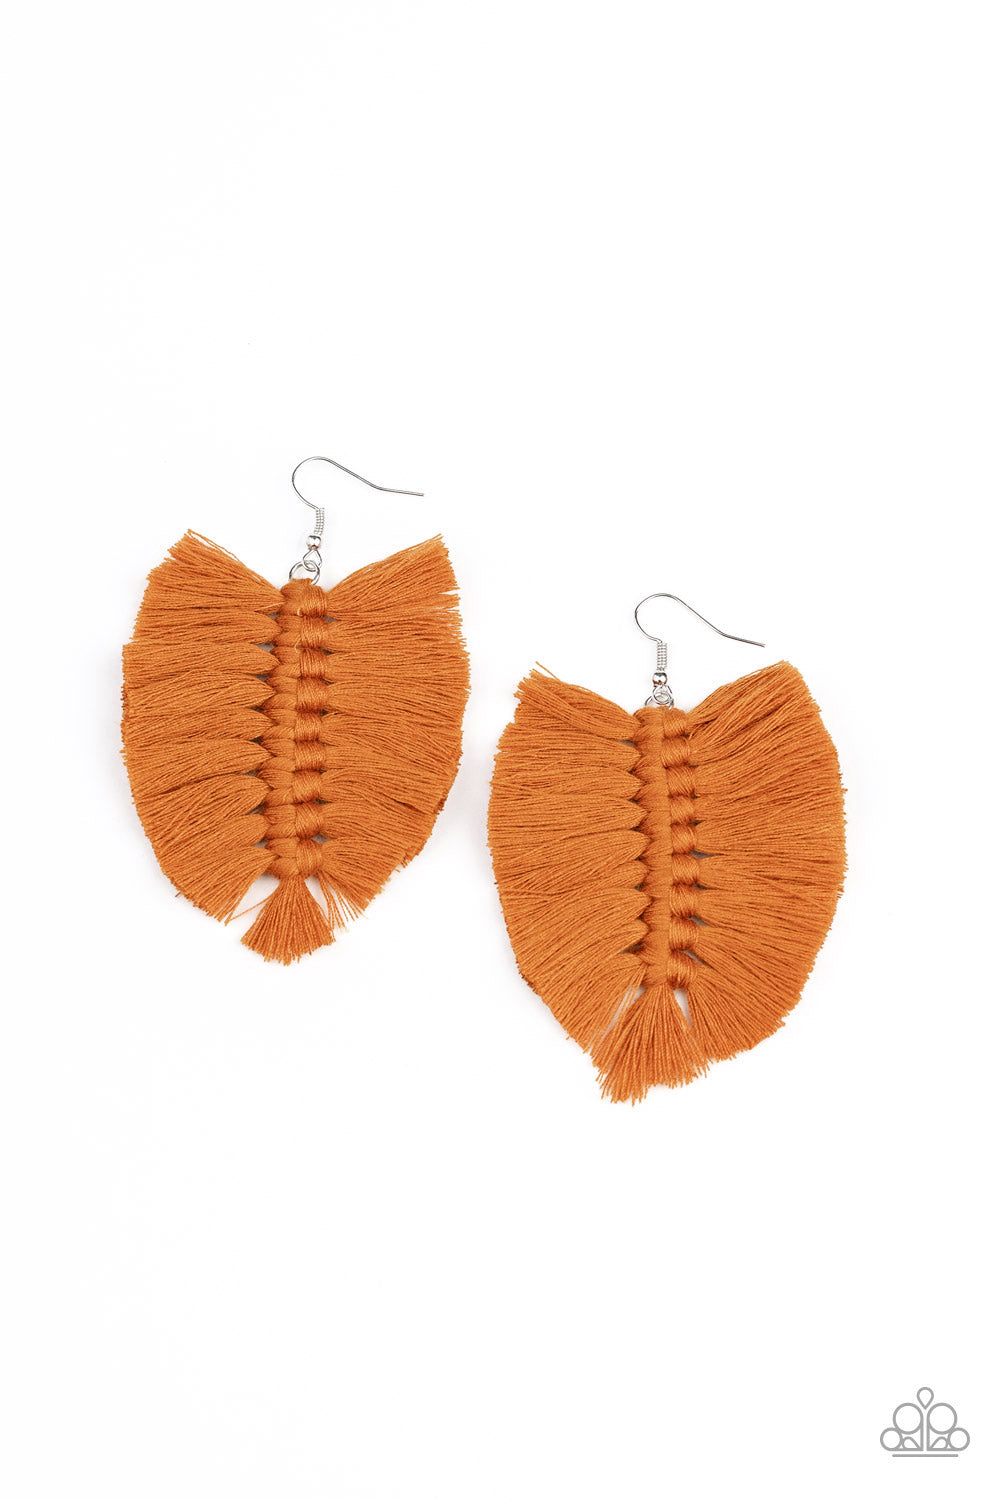 Paparazzi Accessories - Knotted Native - Brown Earrings